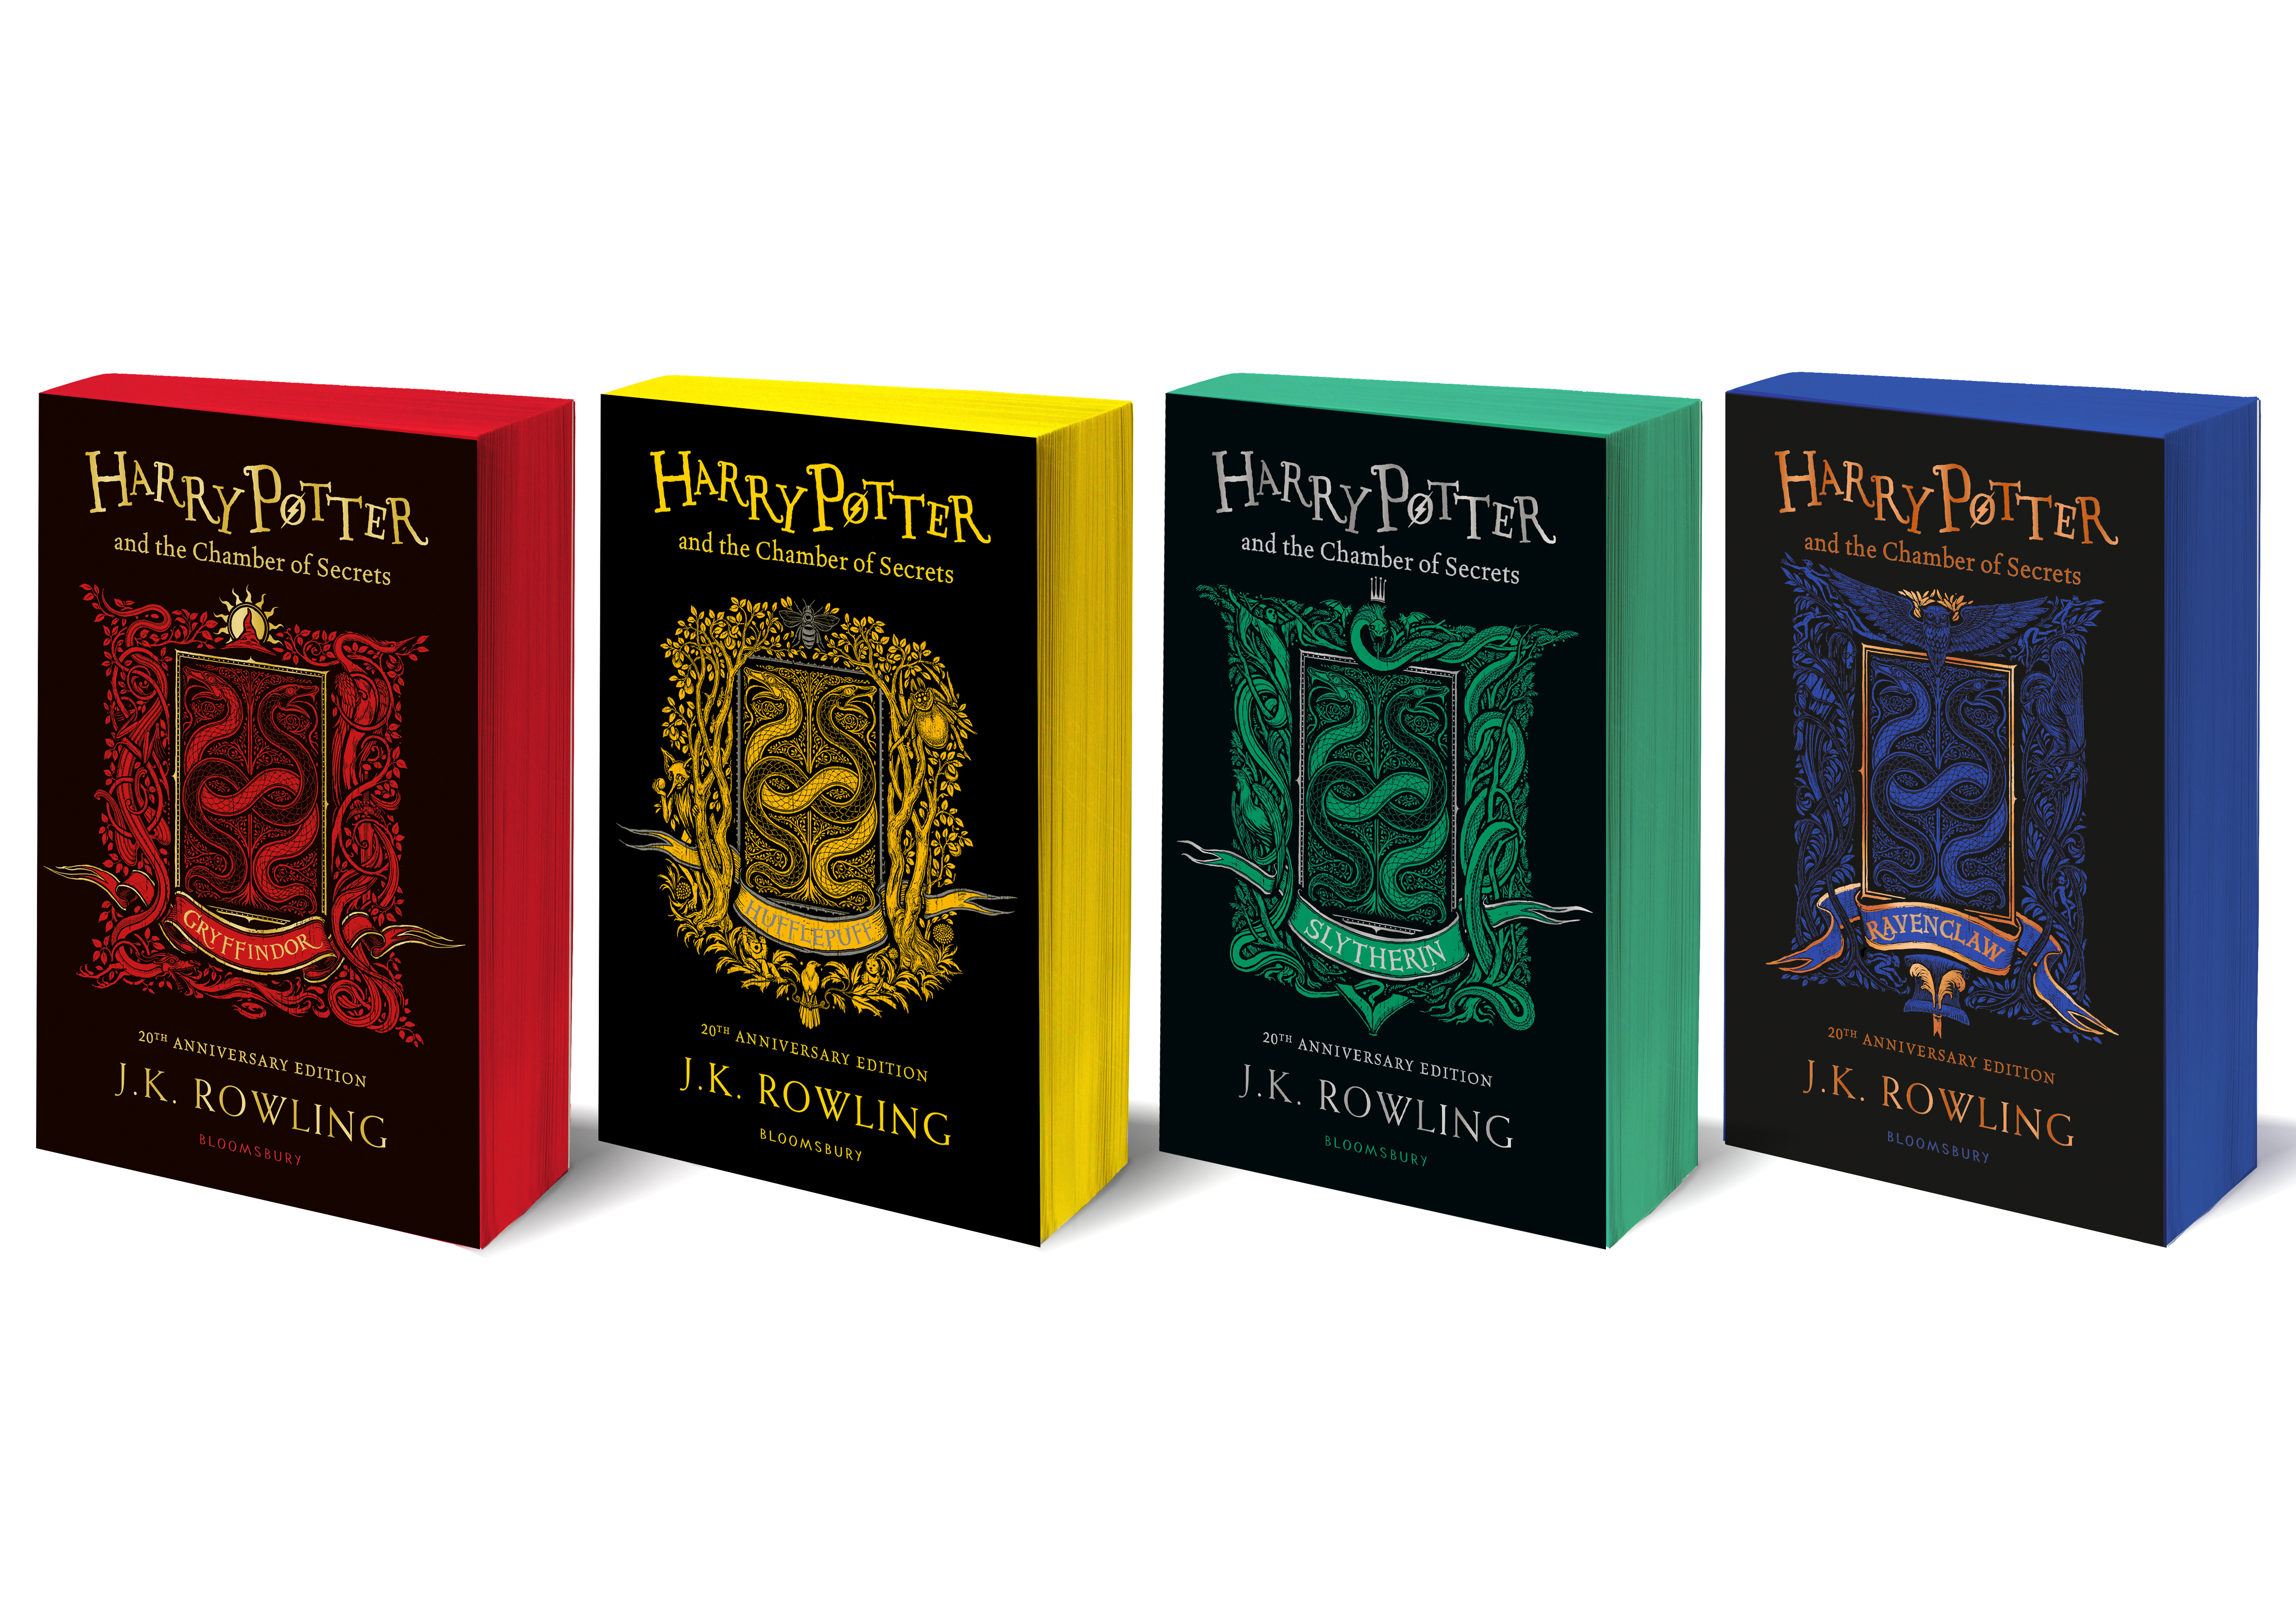 Are there any special editions of the Harry Potter books? 2